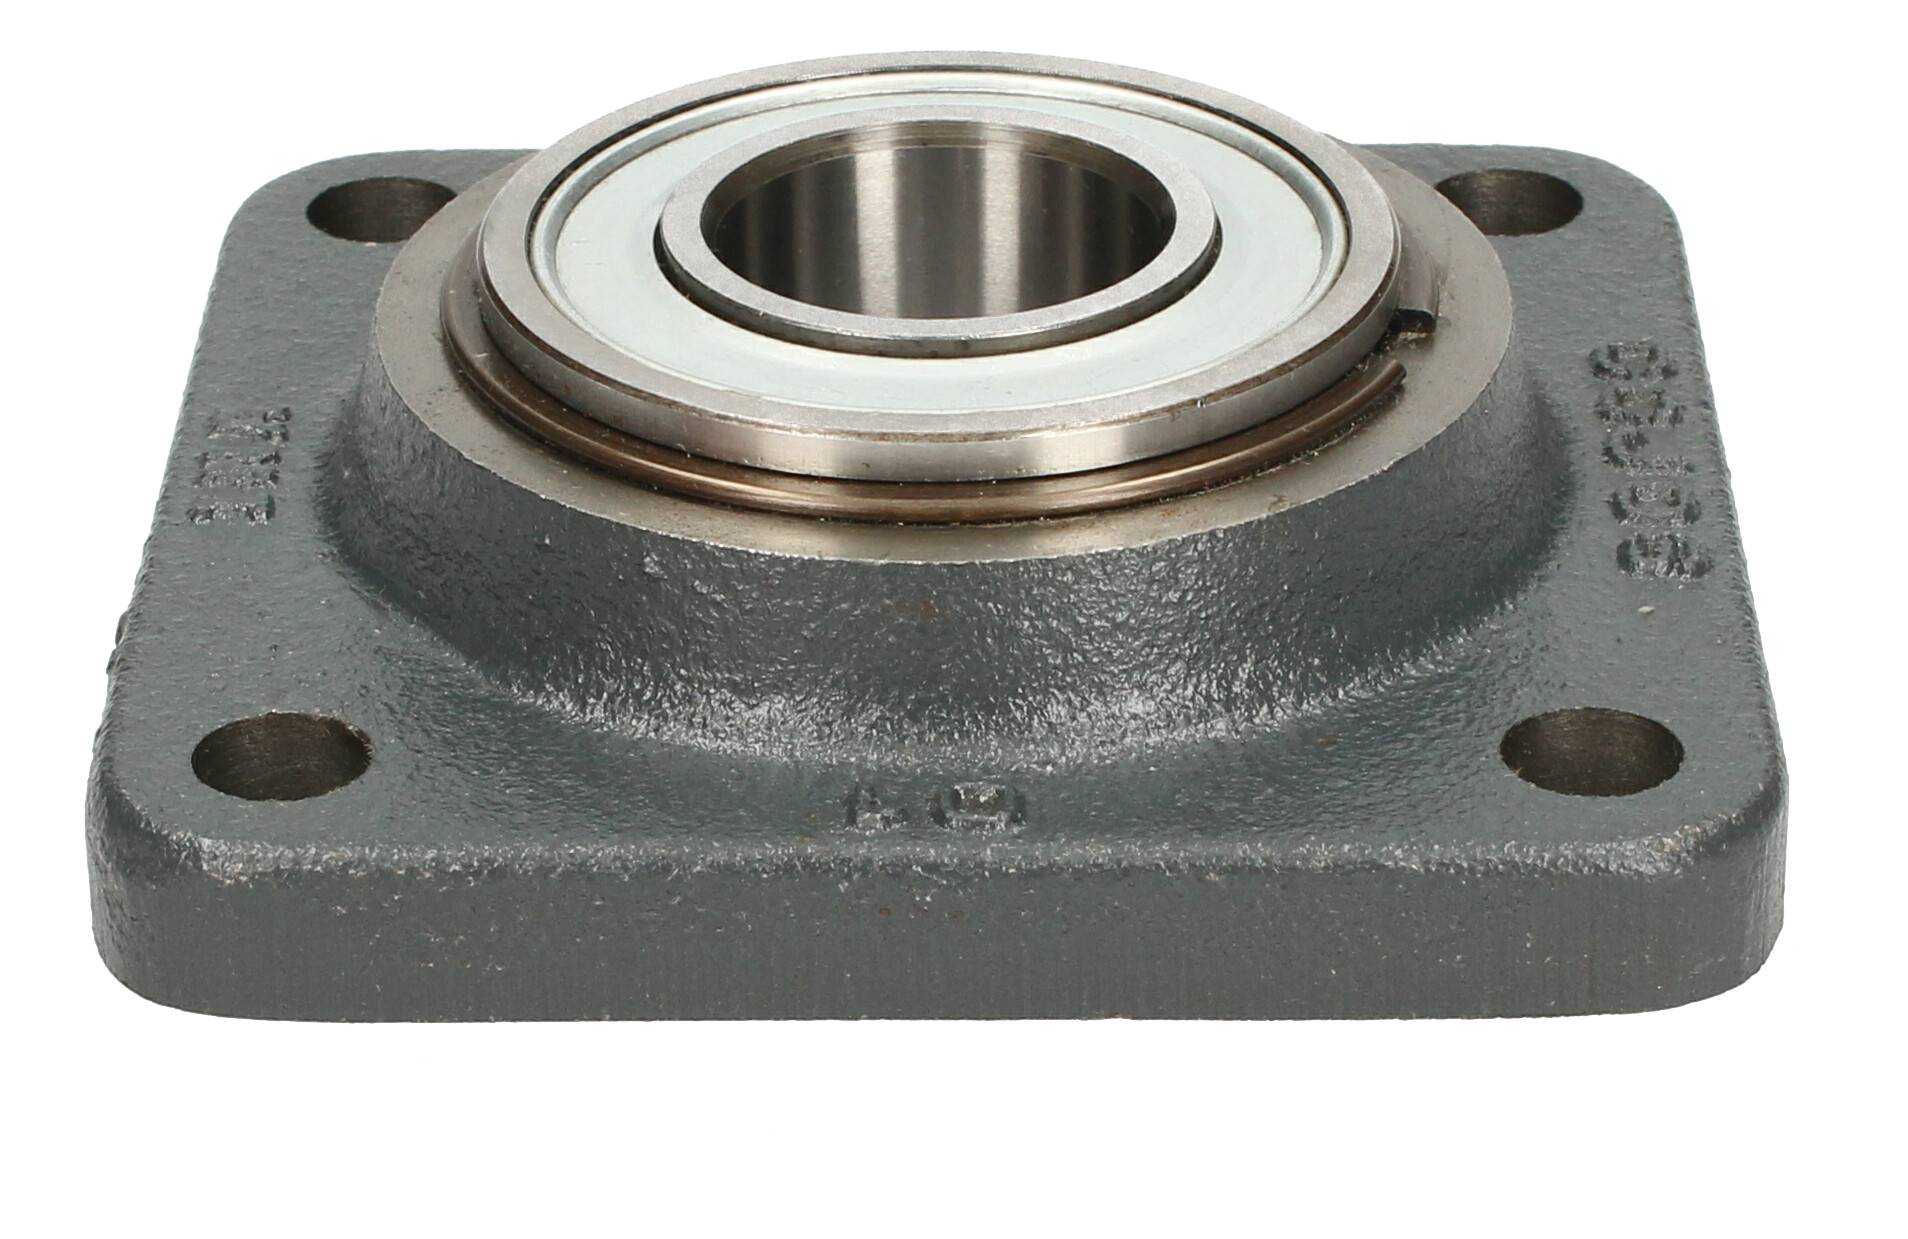 BALL BEARING G-5206-2RSN-INA WITH HOUSING TYPE UCF206 (WITHOUT PACKAGING) - Image 1